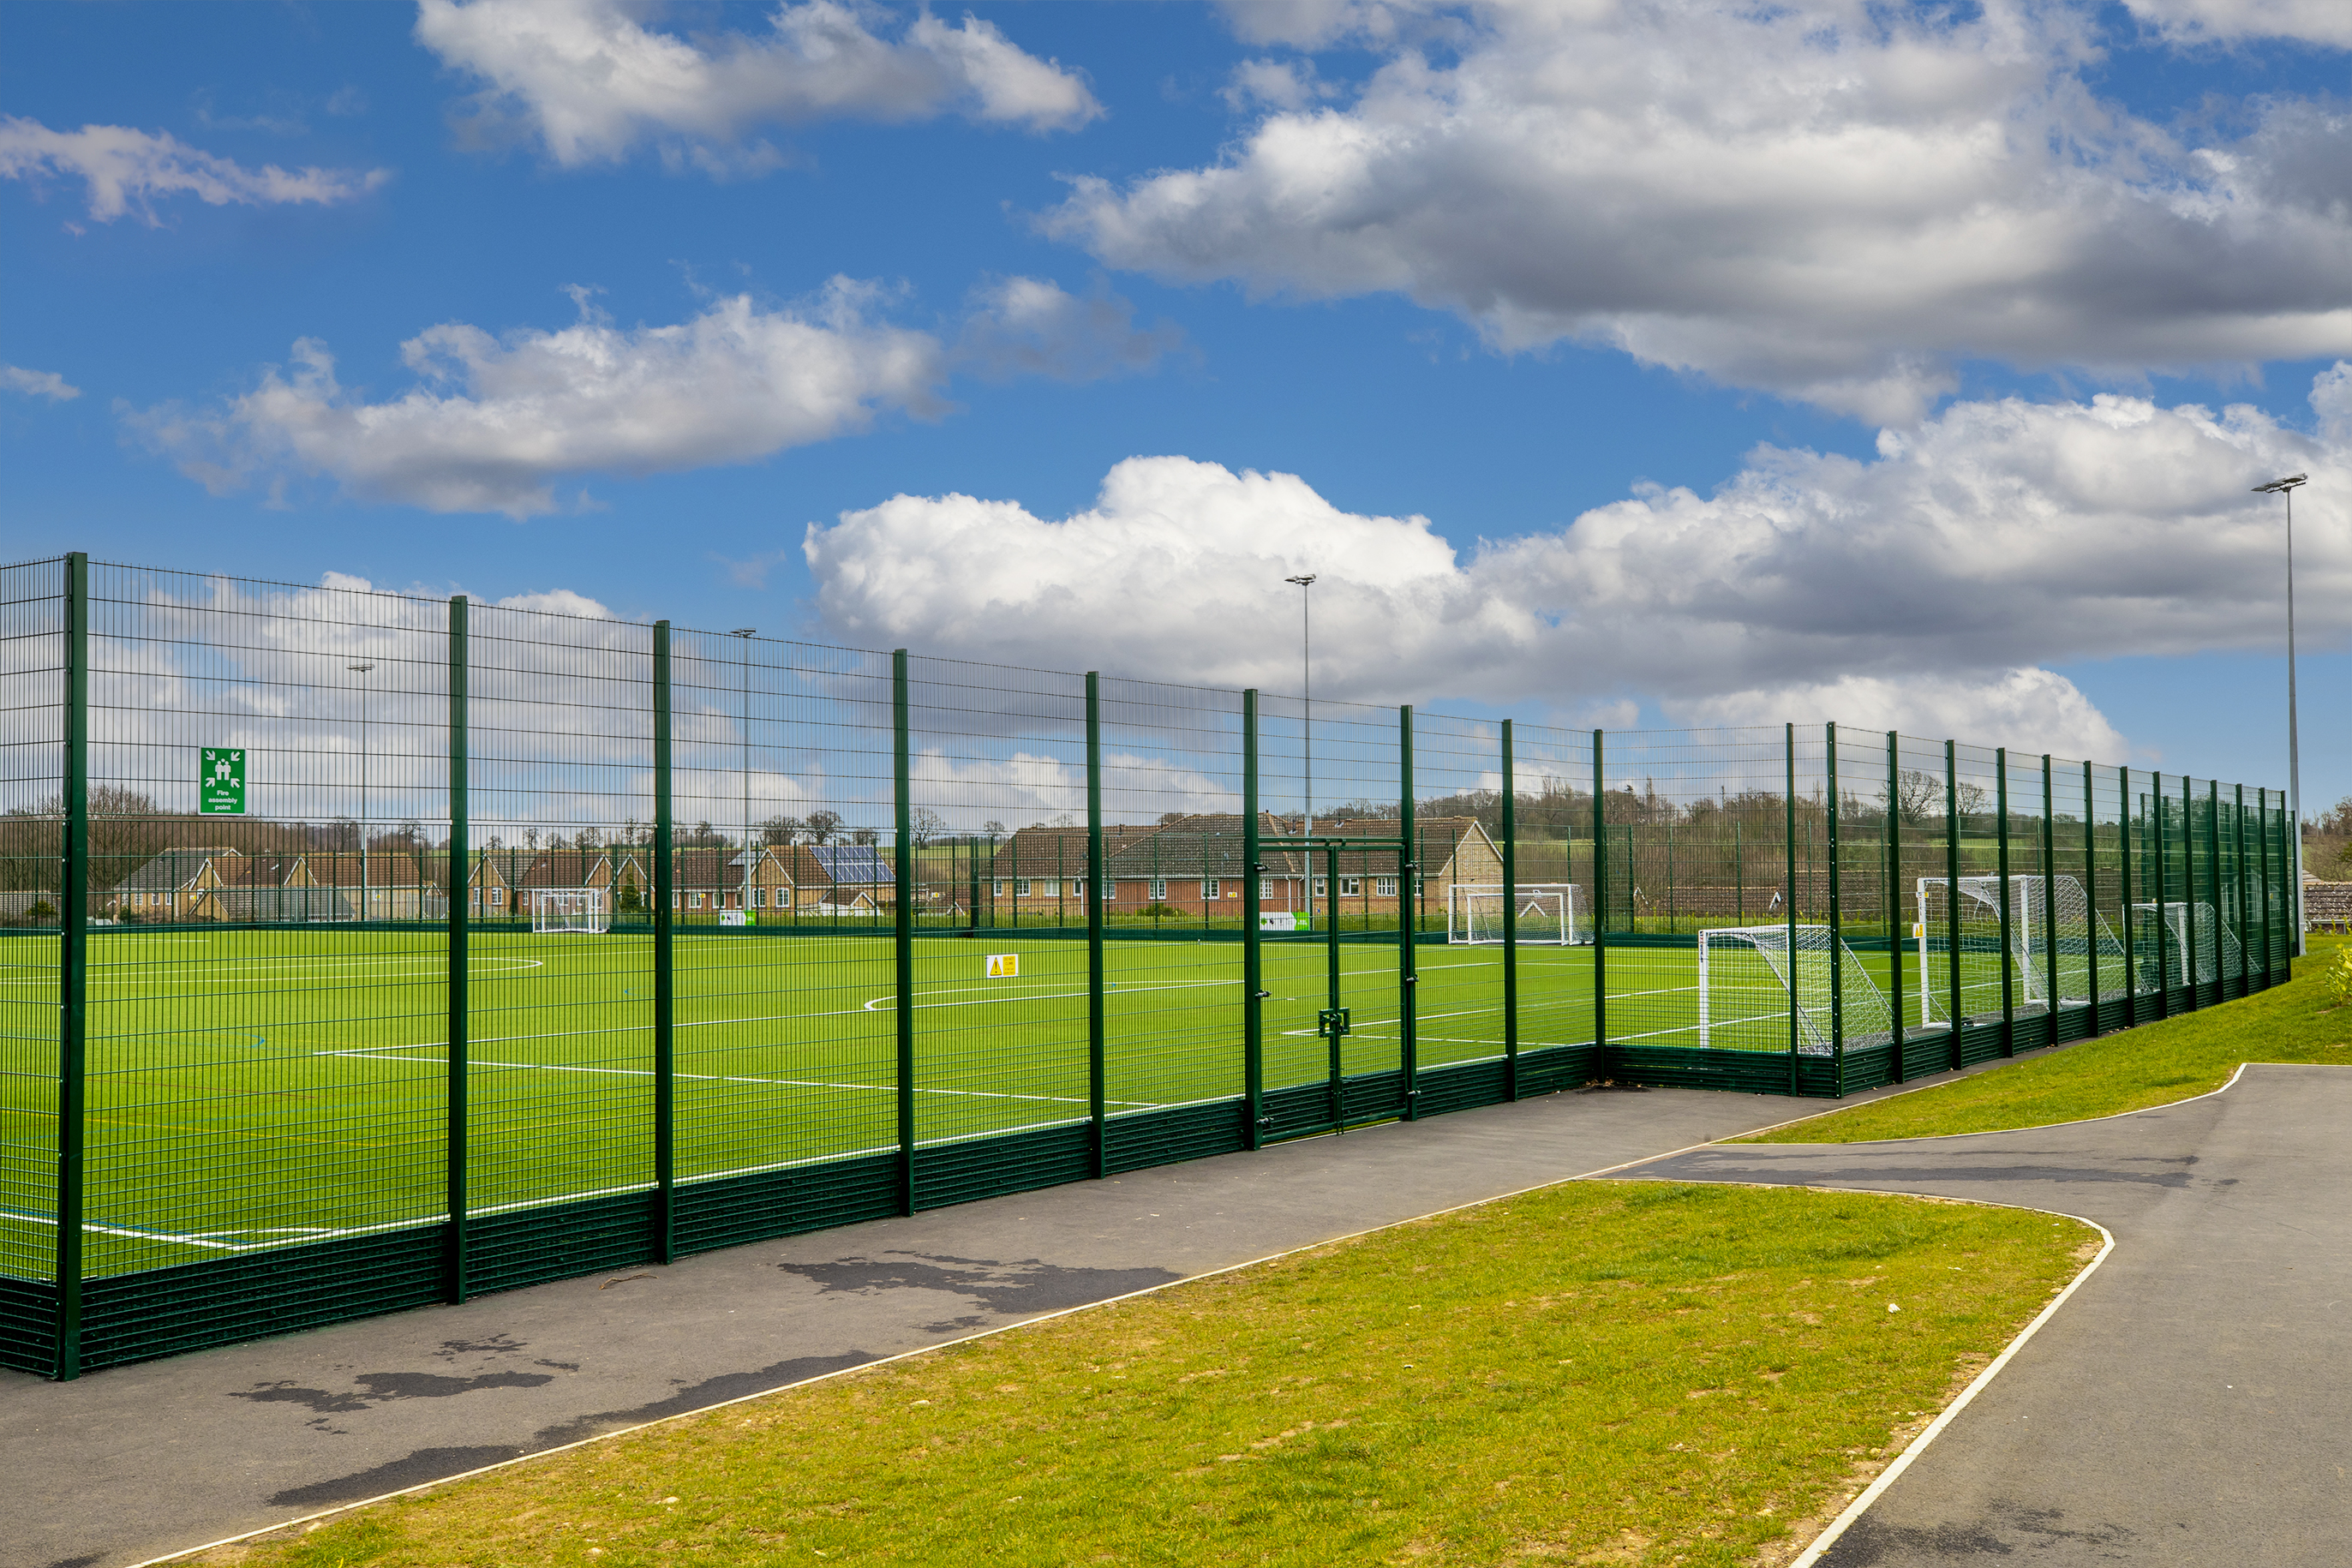 Halstead leisure centre of a artificial grass pitch - Image